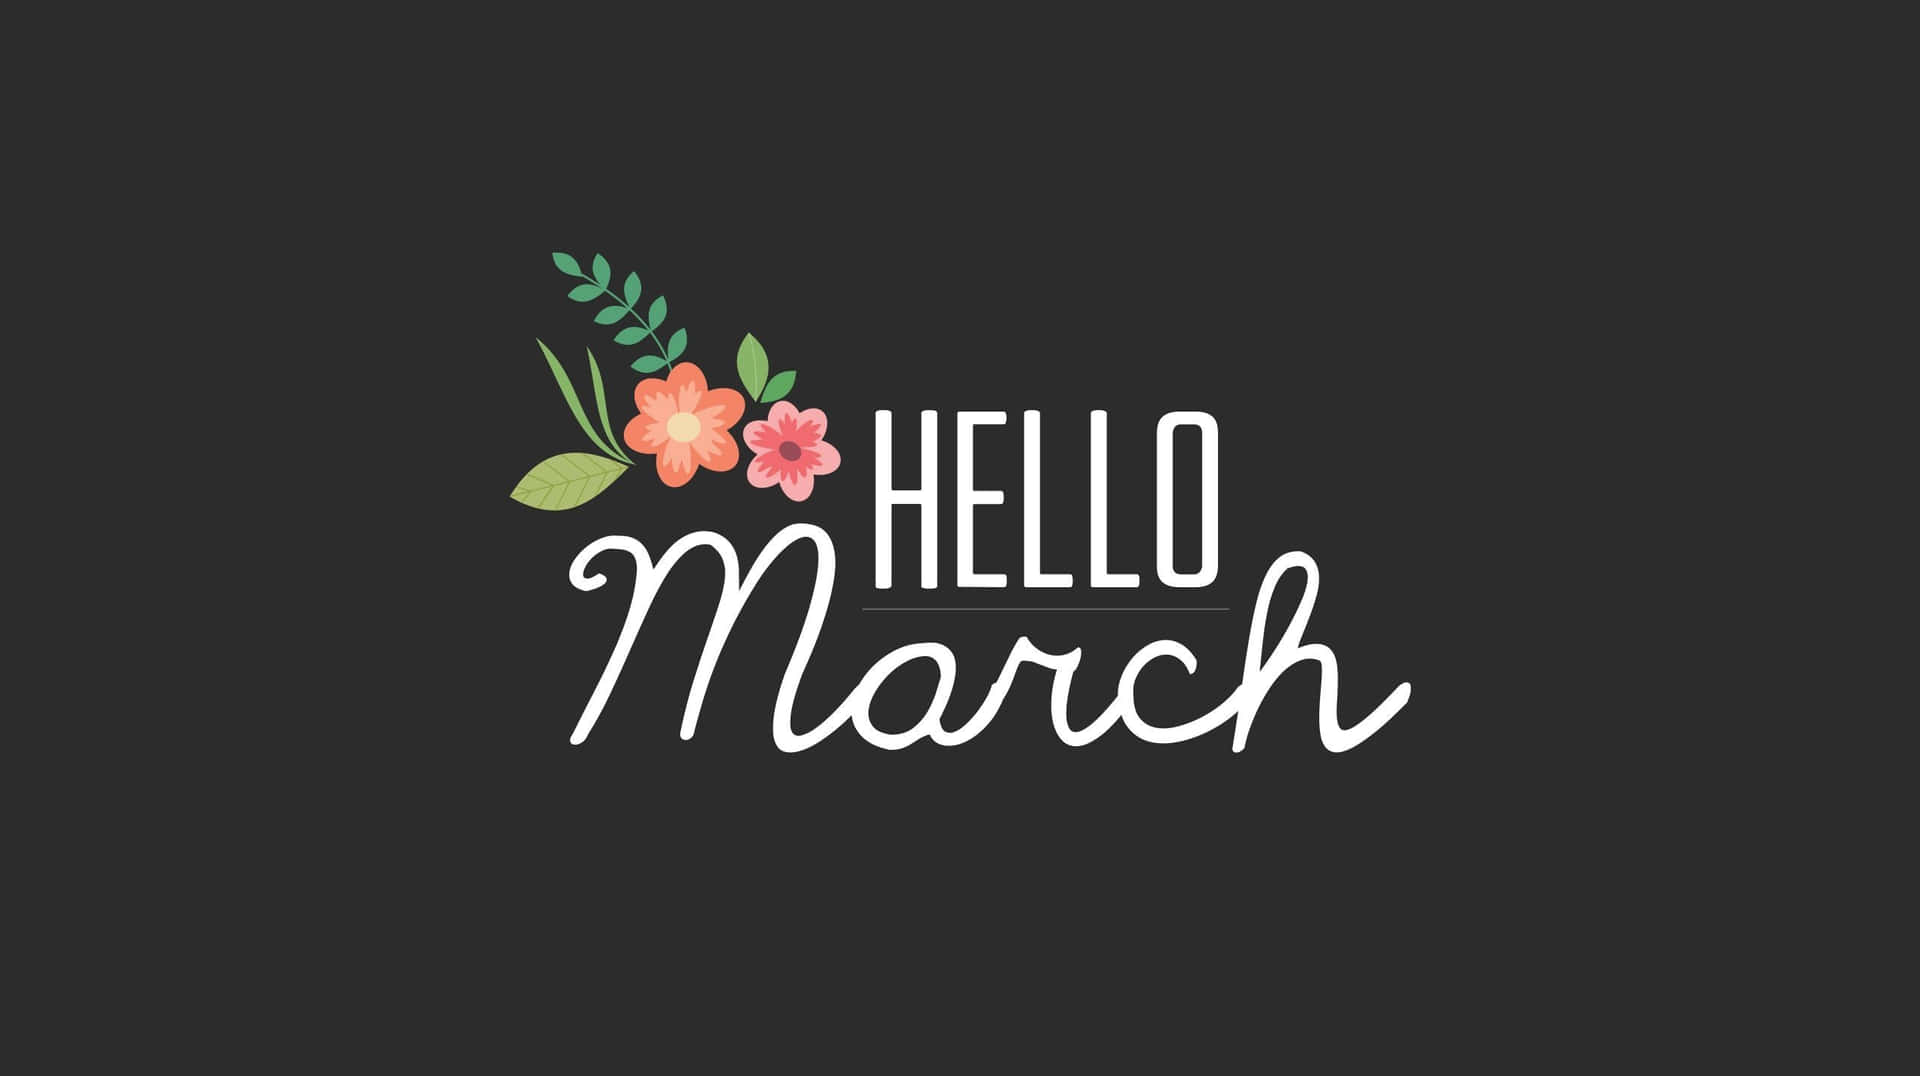 Hello March Floral Greeting Design Wallpaper